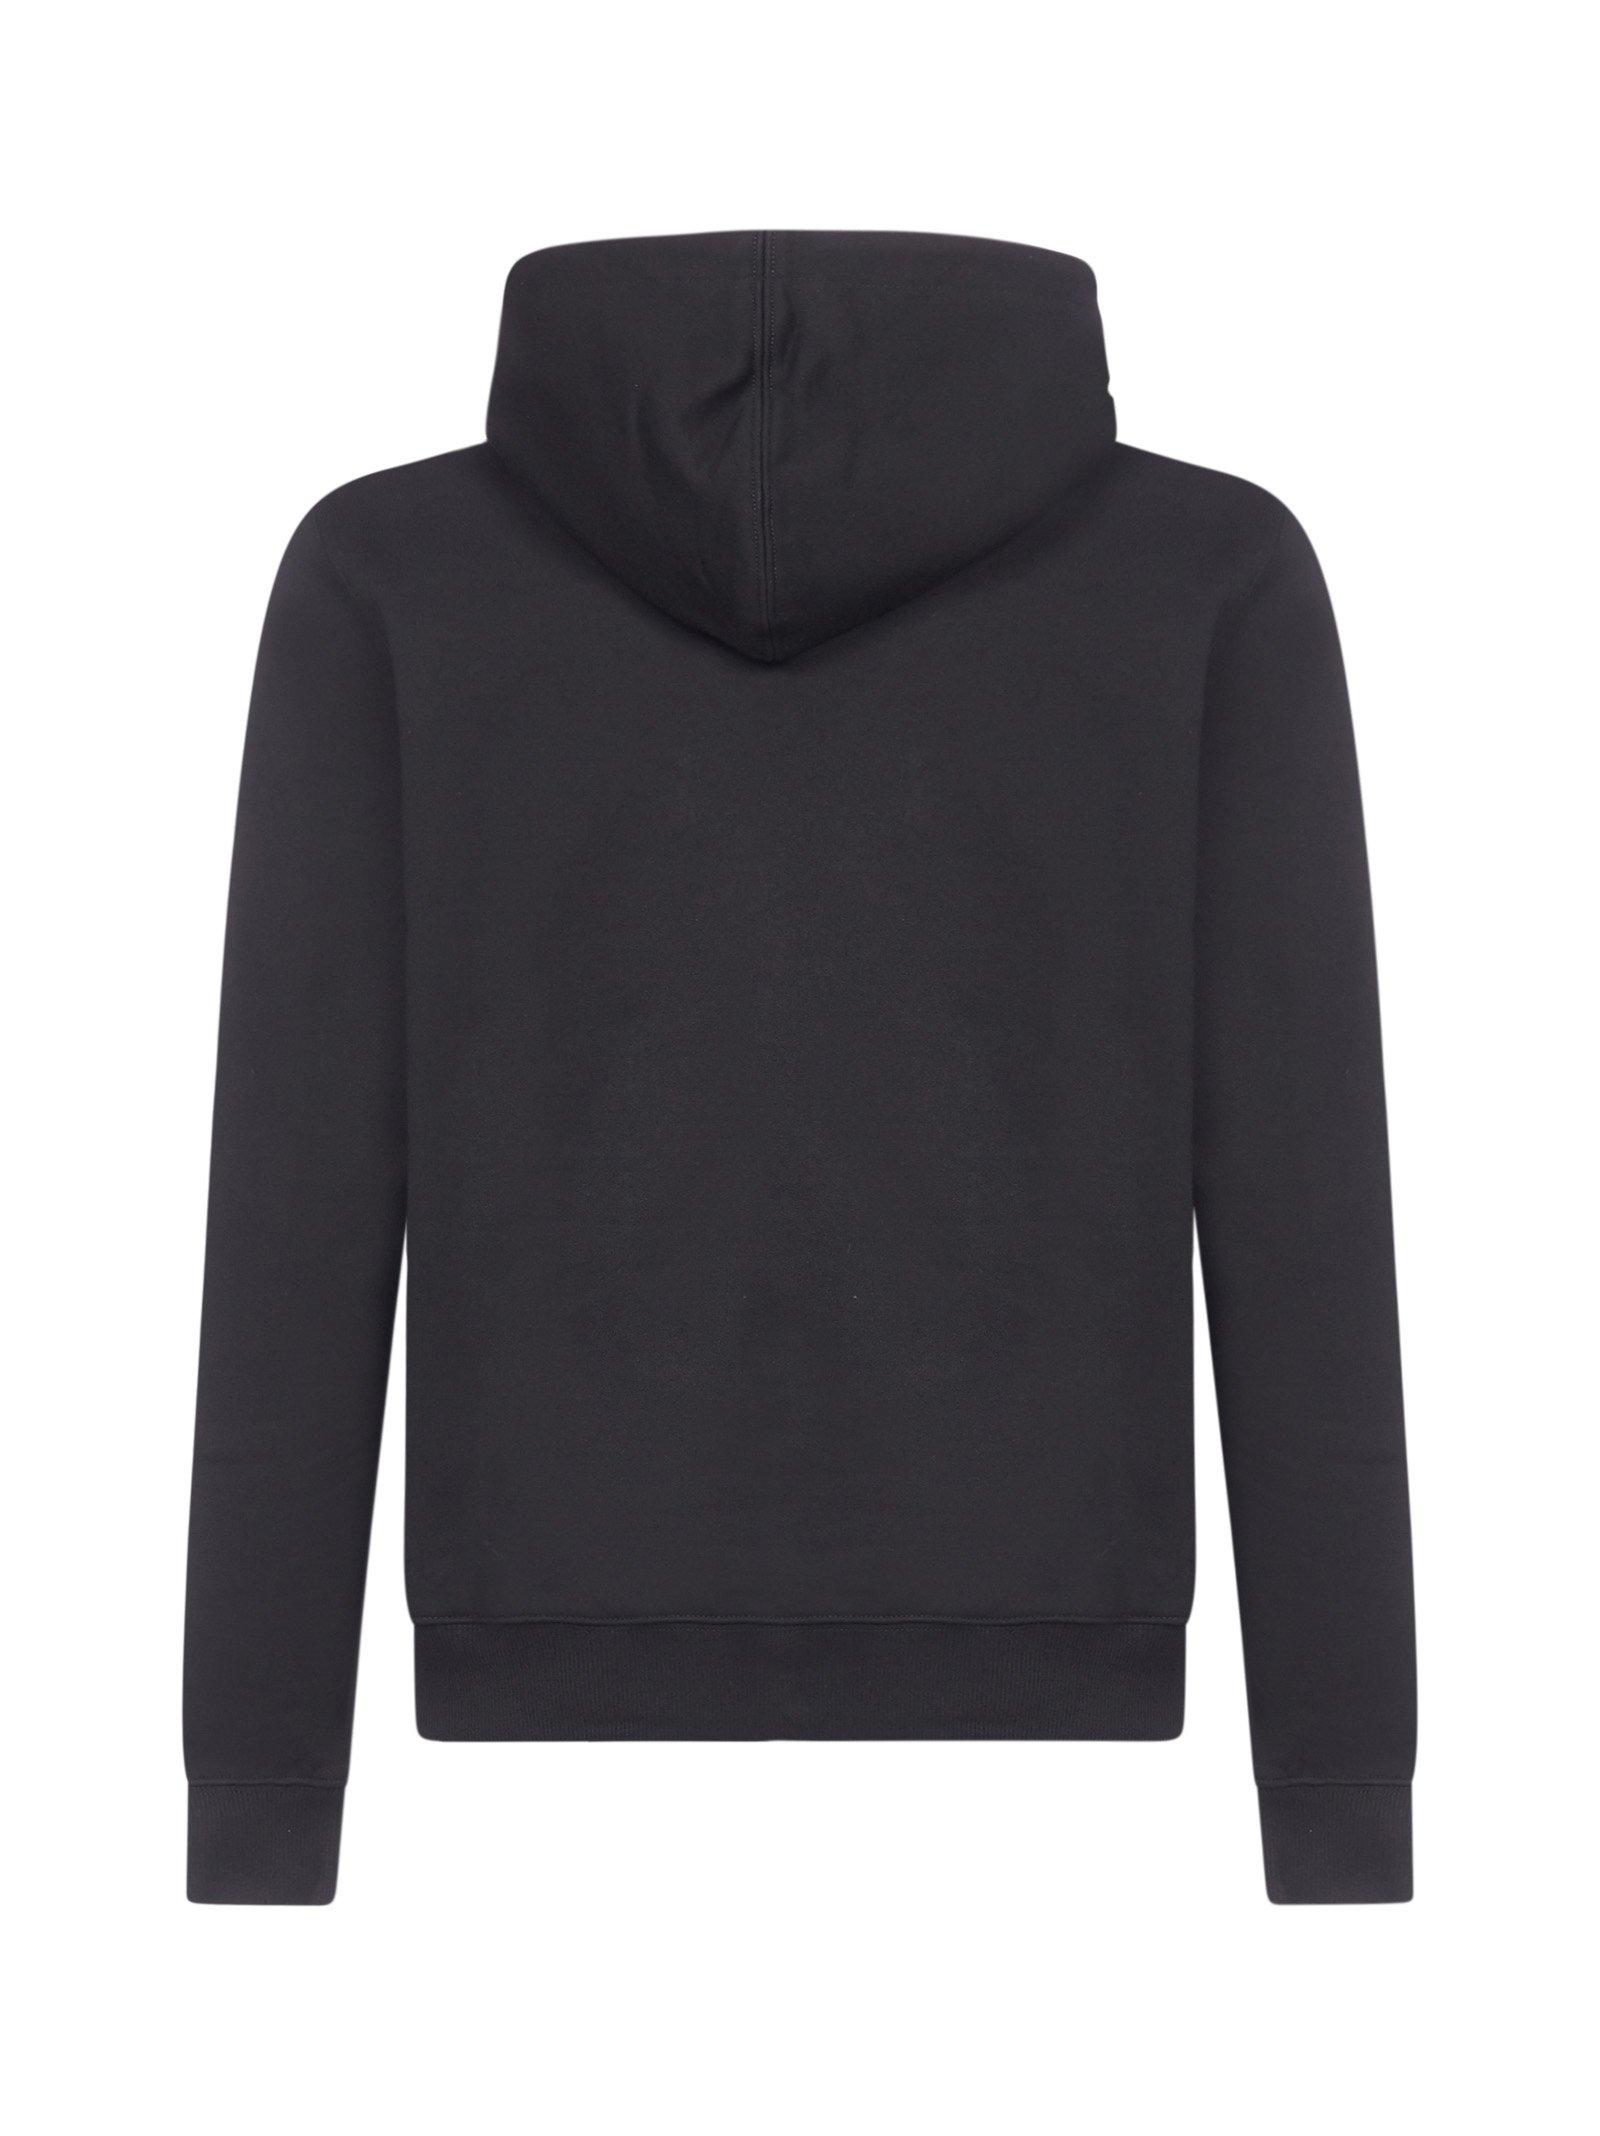 Dior Cotton Cd Icon Hooded Sweatshirt in Black for Men - Lyst